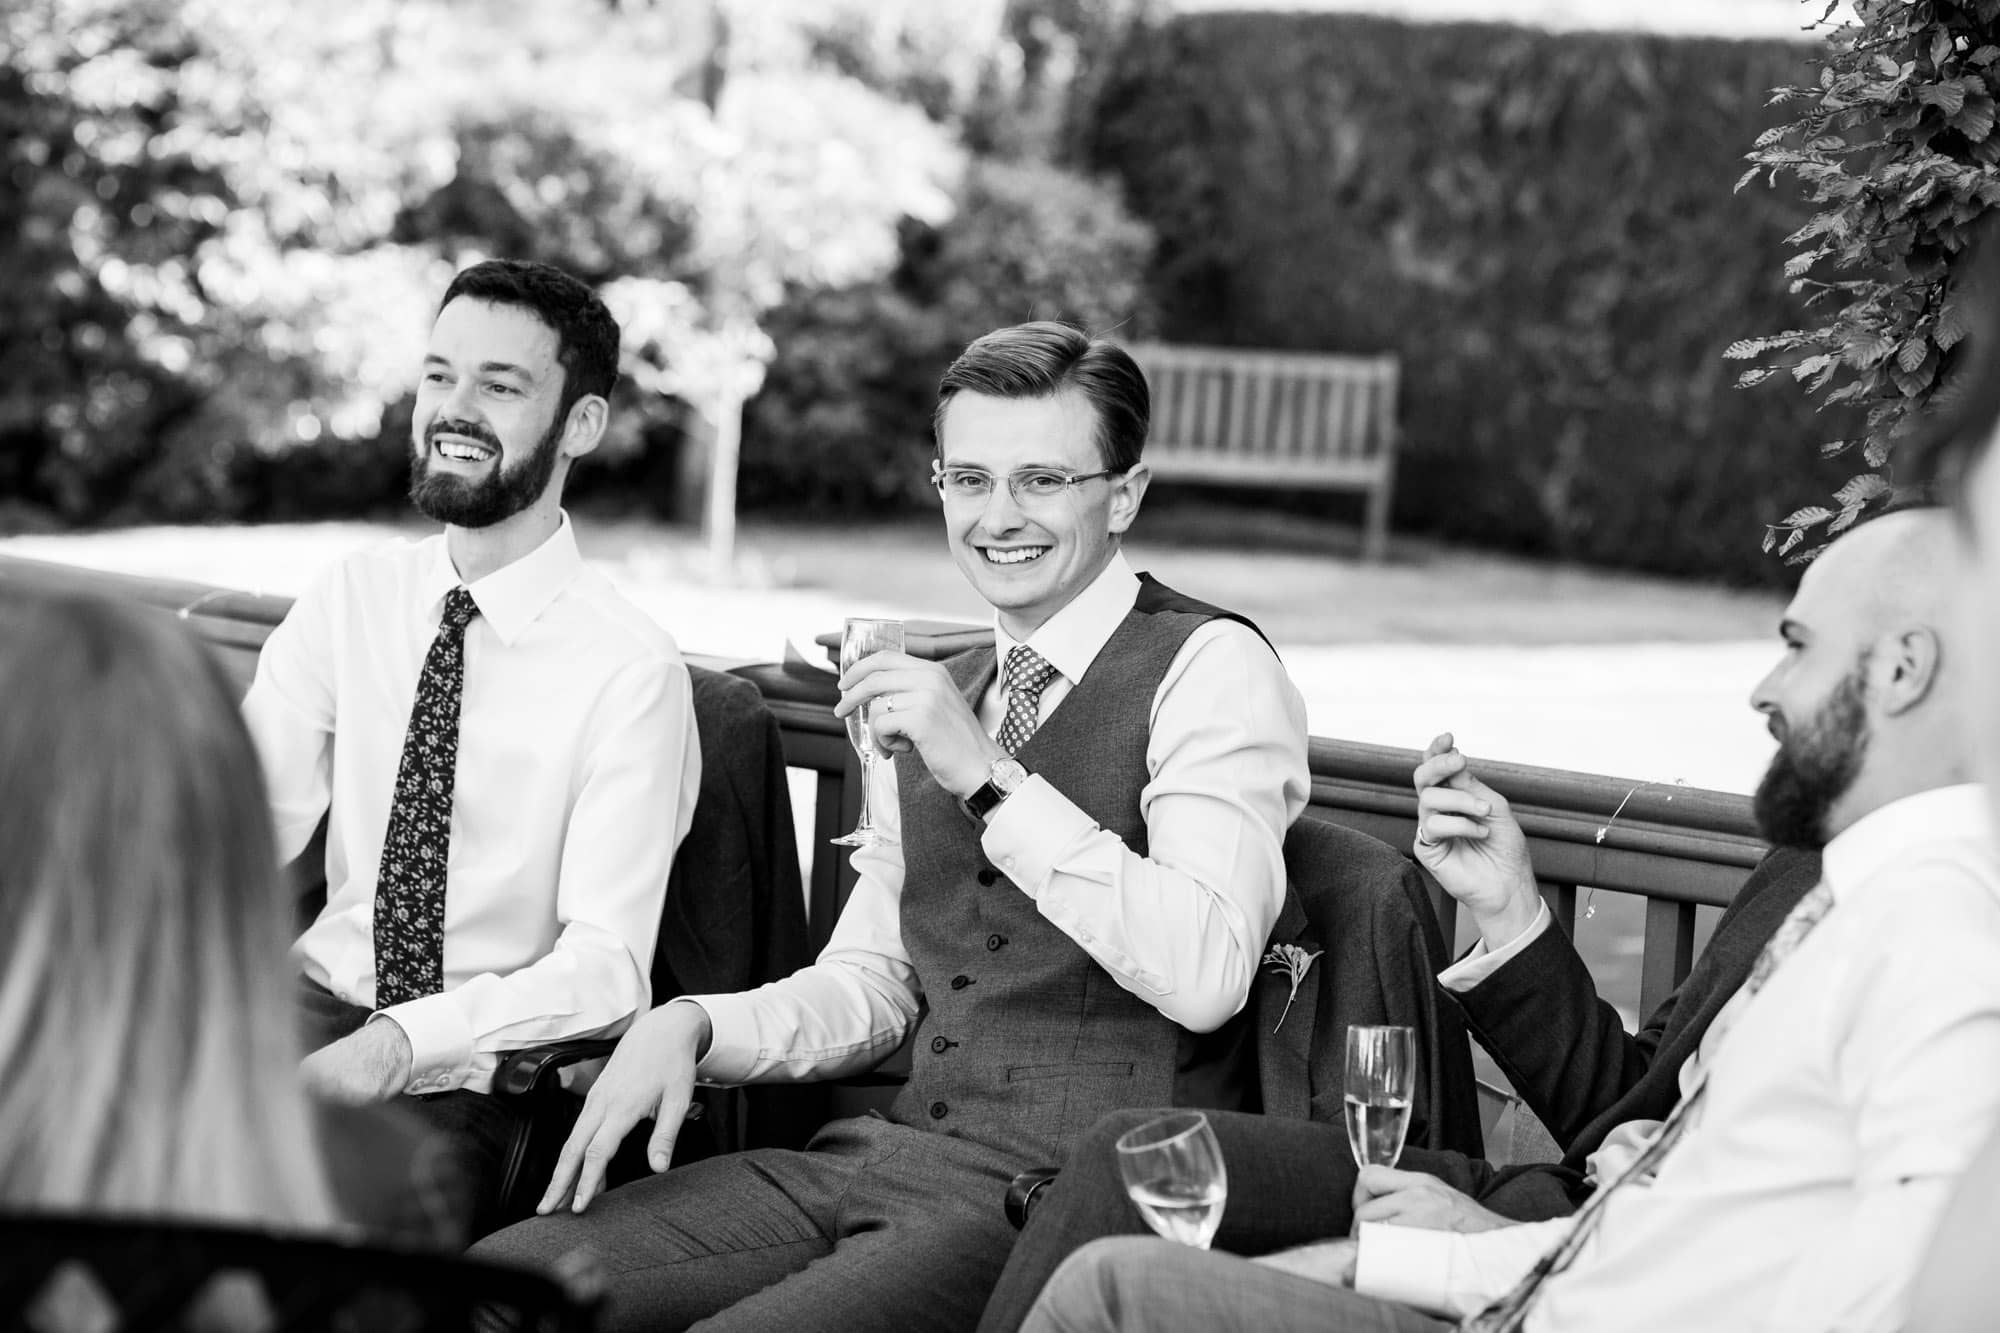 Groom and friends drinking and smiling at wedding reception at Oaks Farm Weddings taken by Bromley wedding photographer